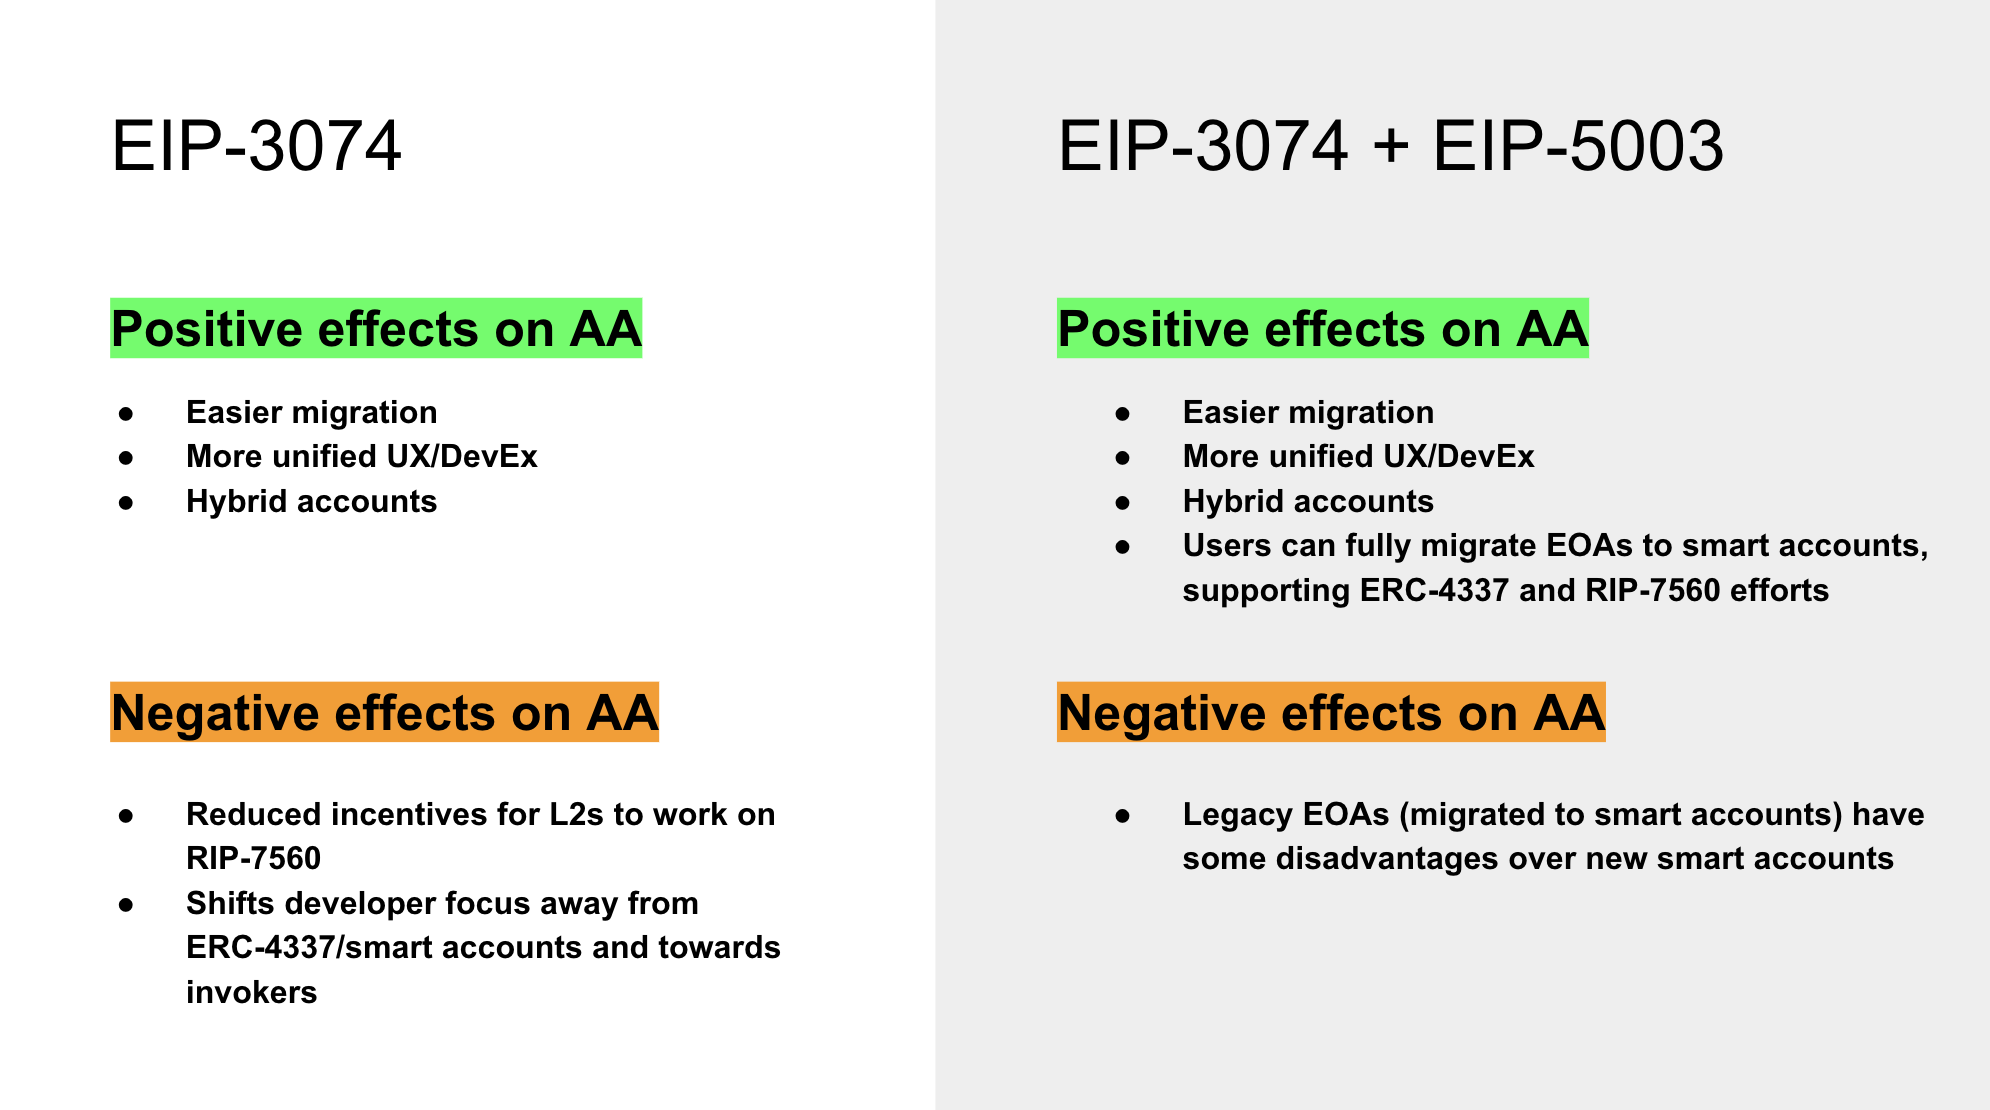 Effects of EIP-3074 on AA roadmap, with/without EIP-5003